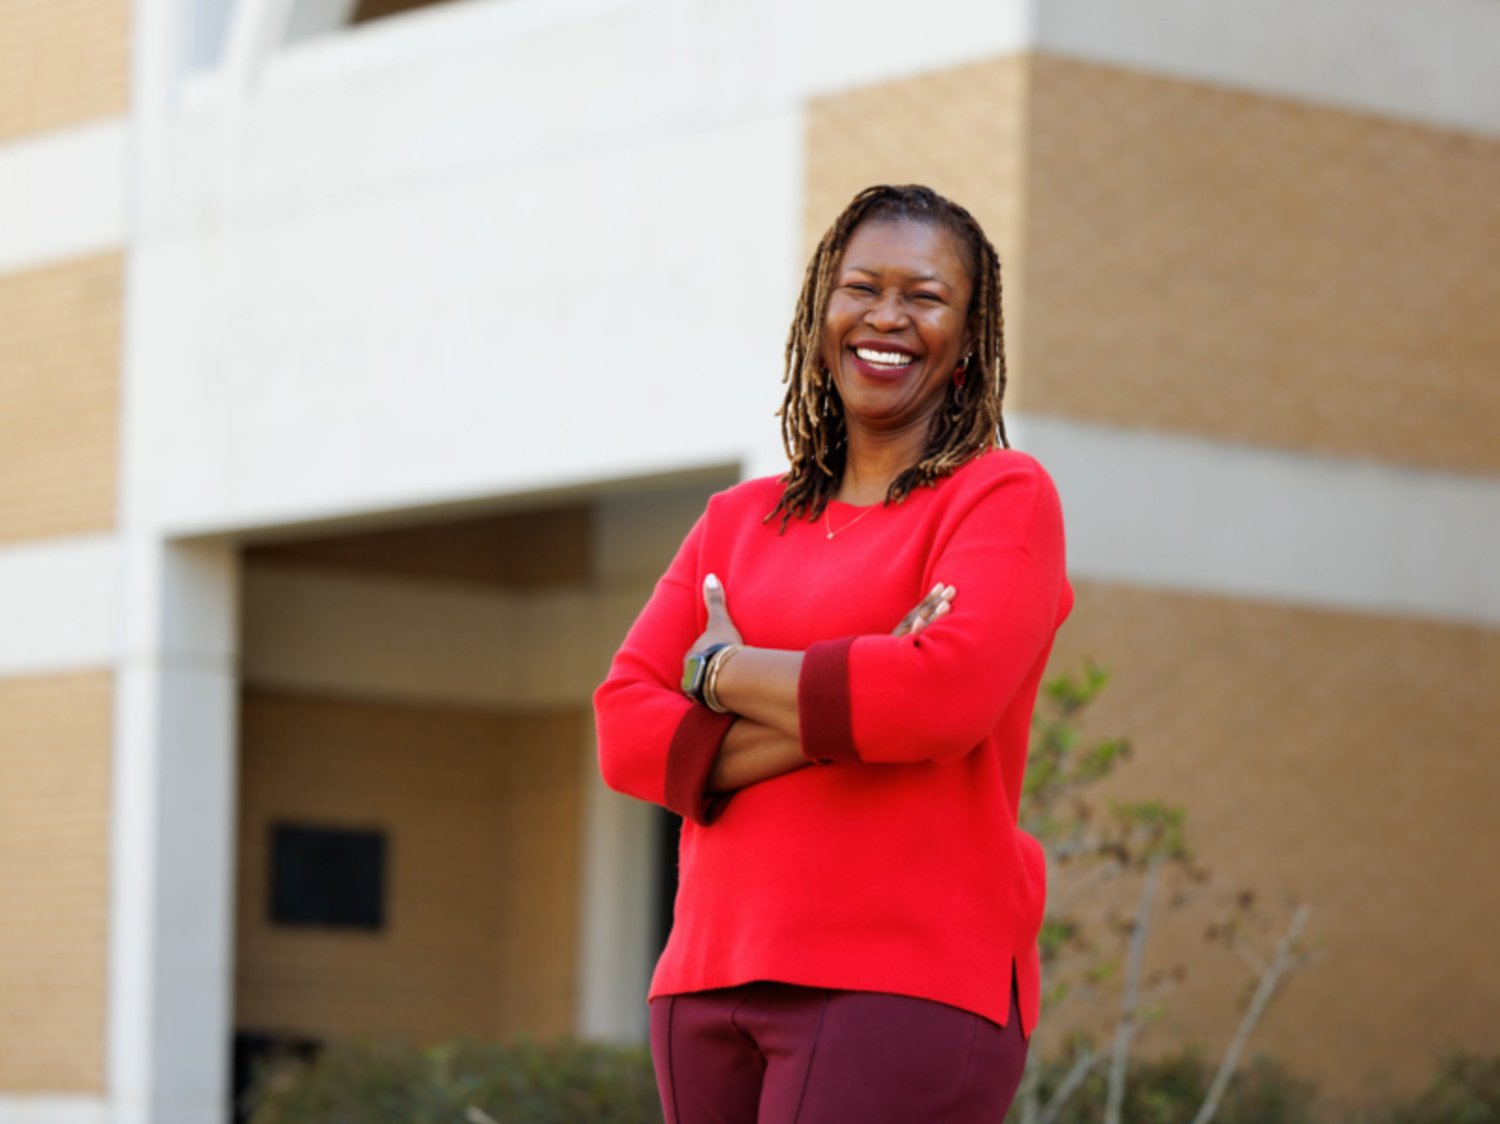 Dr. Tawana Tucker of Ridgeland, Health Promotion Disease Prevention (HPDP) program manager at Veterans Affairs Medical Center, is studying at the School of Nursing to become a family nurse practitioner.